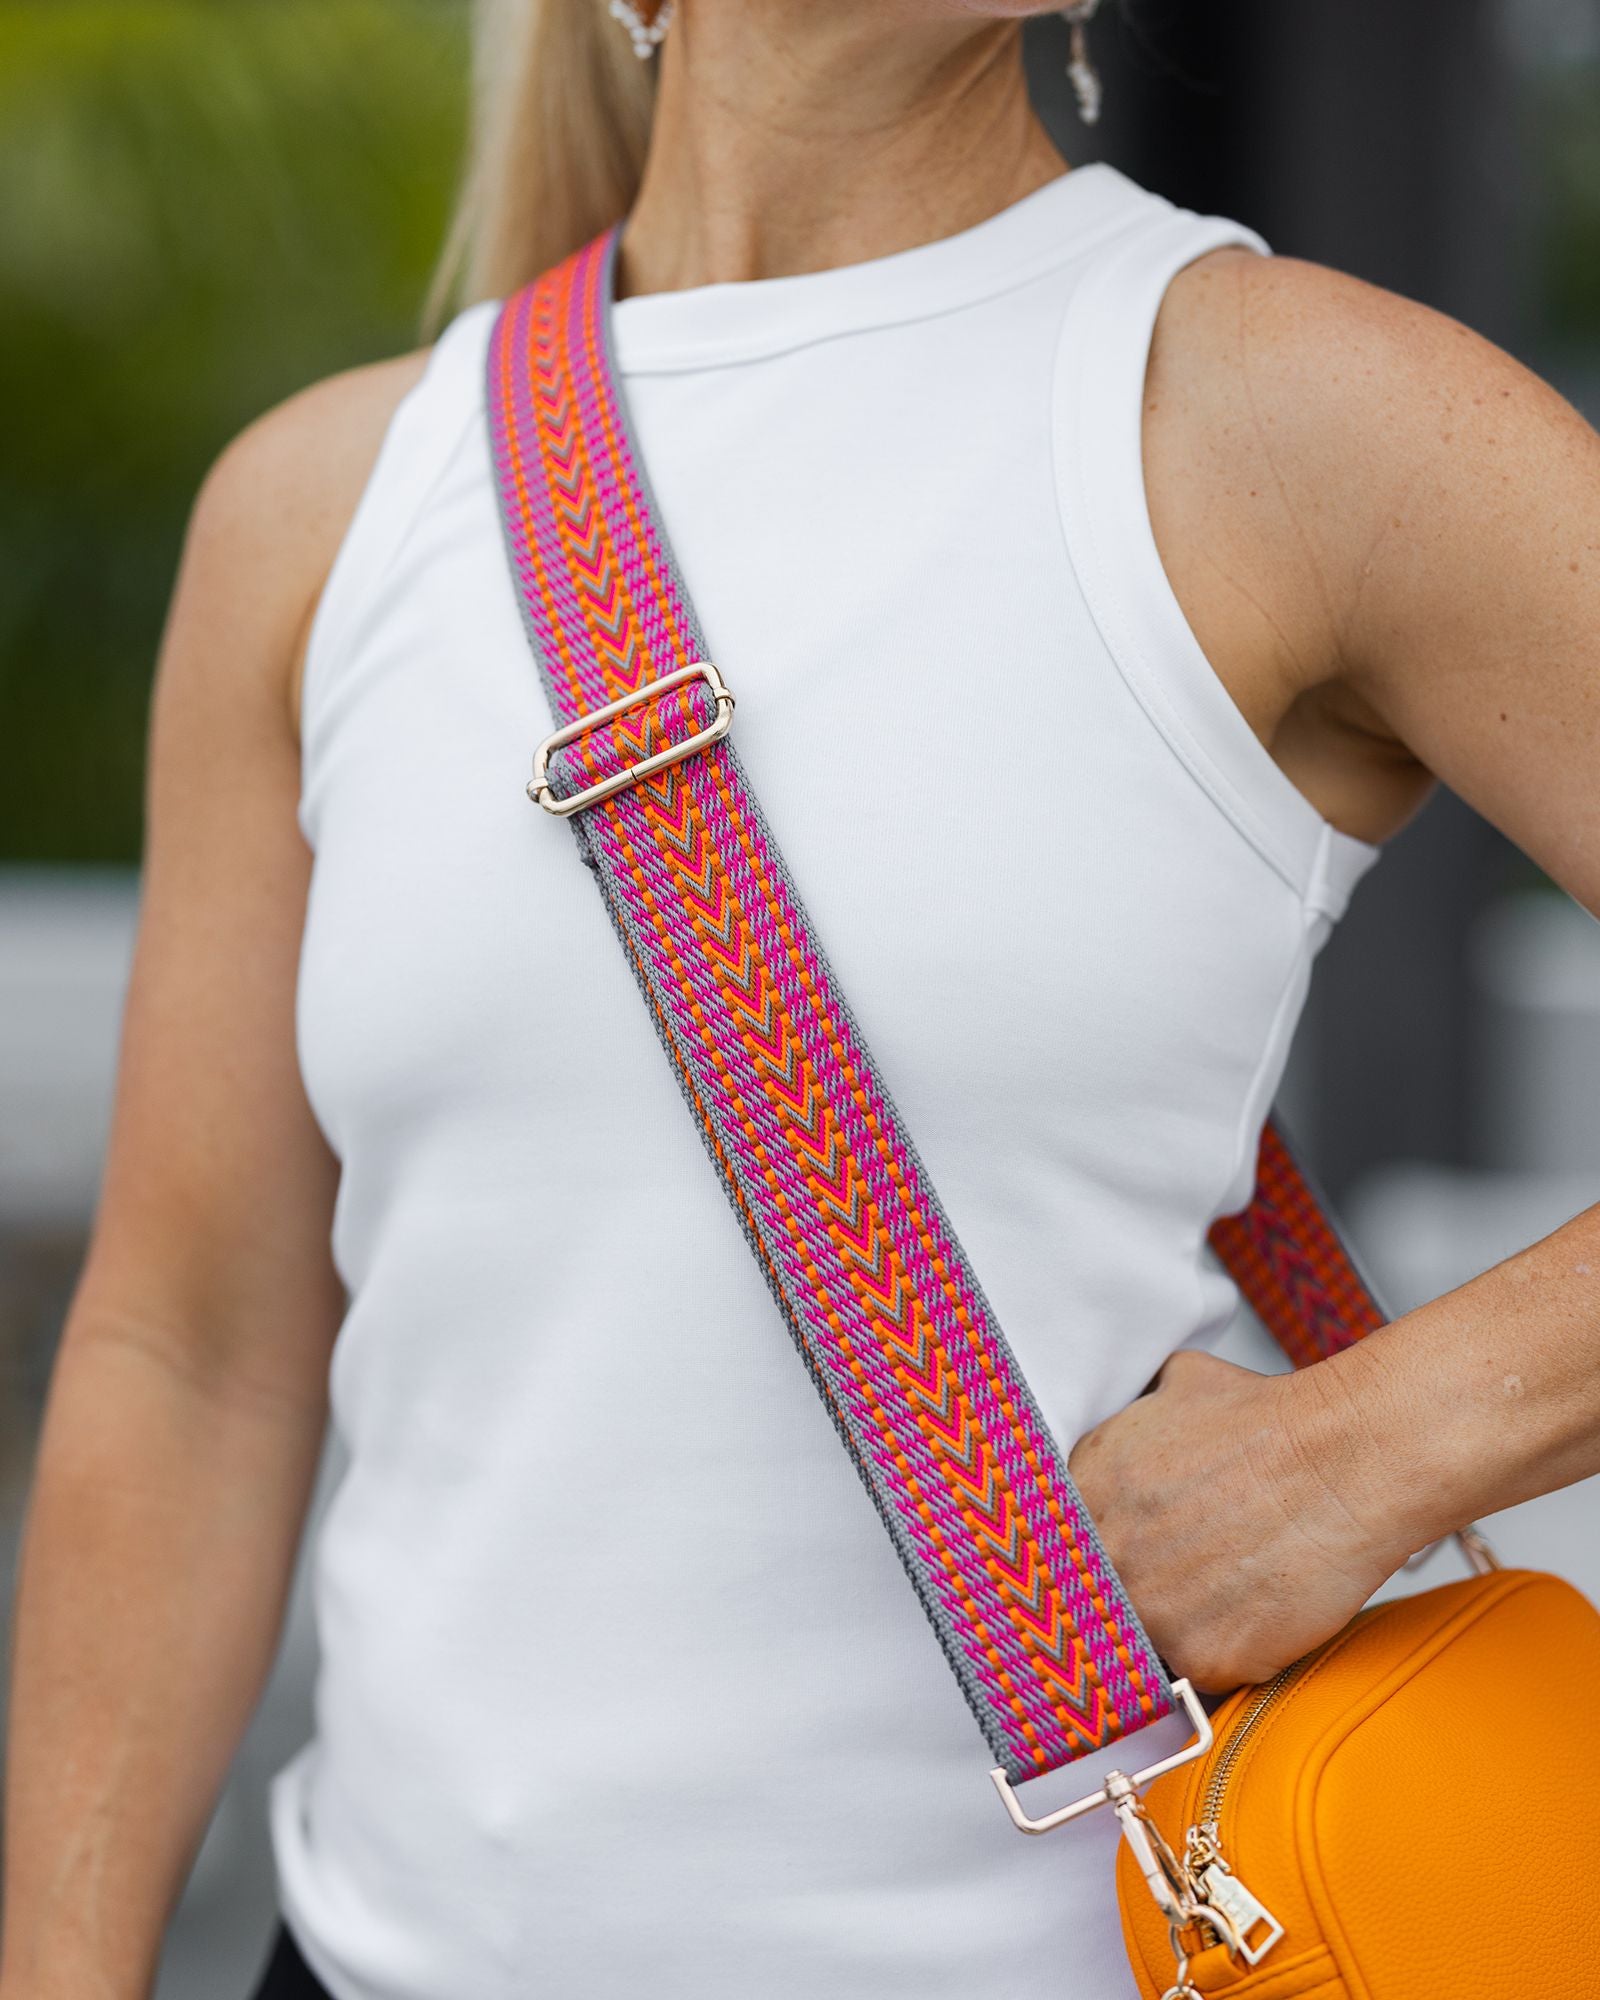 The Louenhide Eddie Guitar Strap is the perfect accessory for any colour lover.